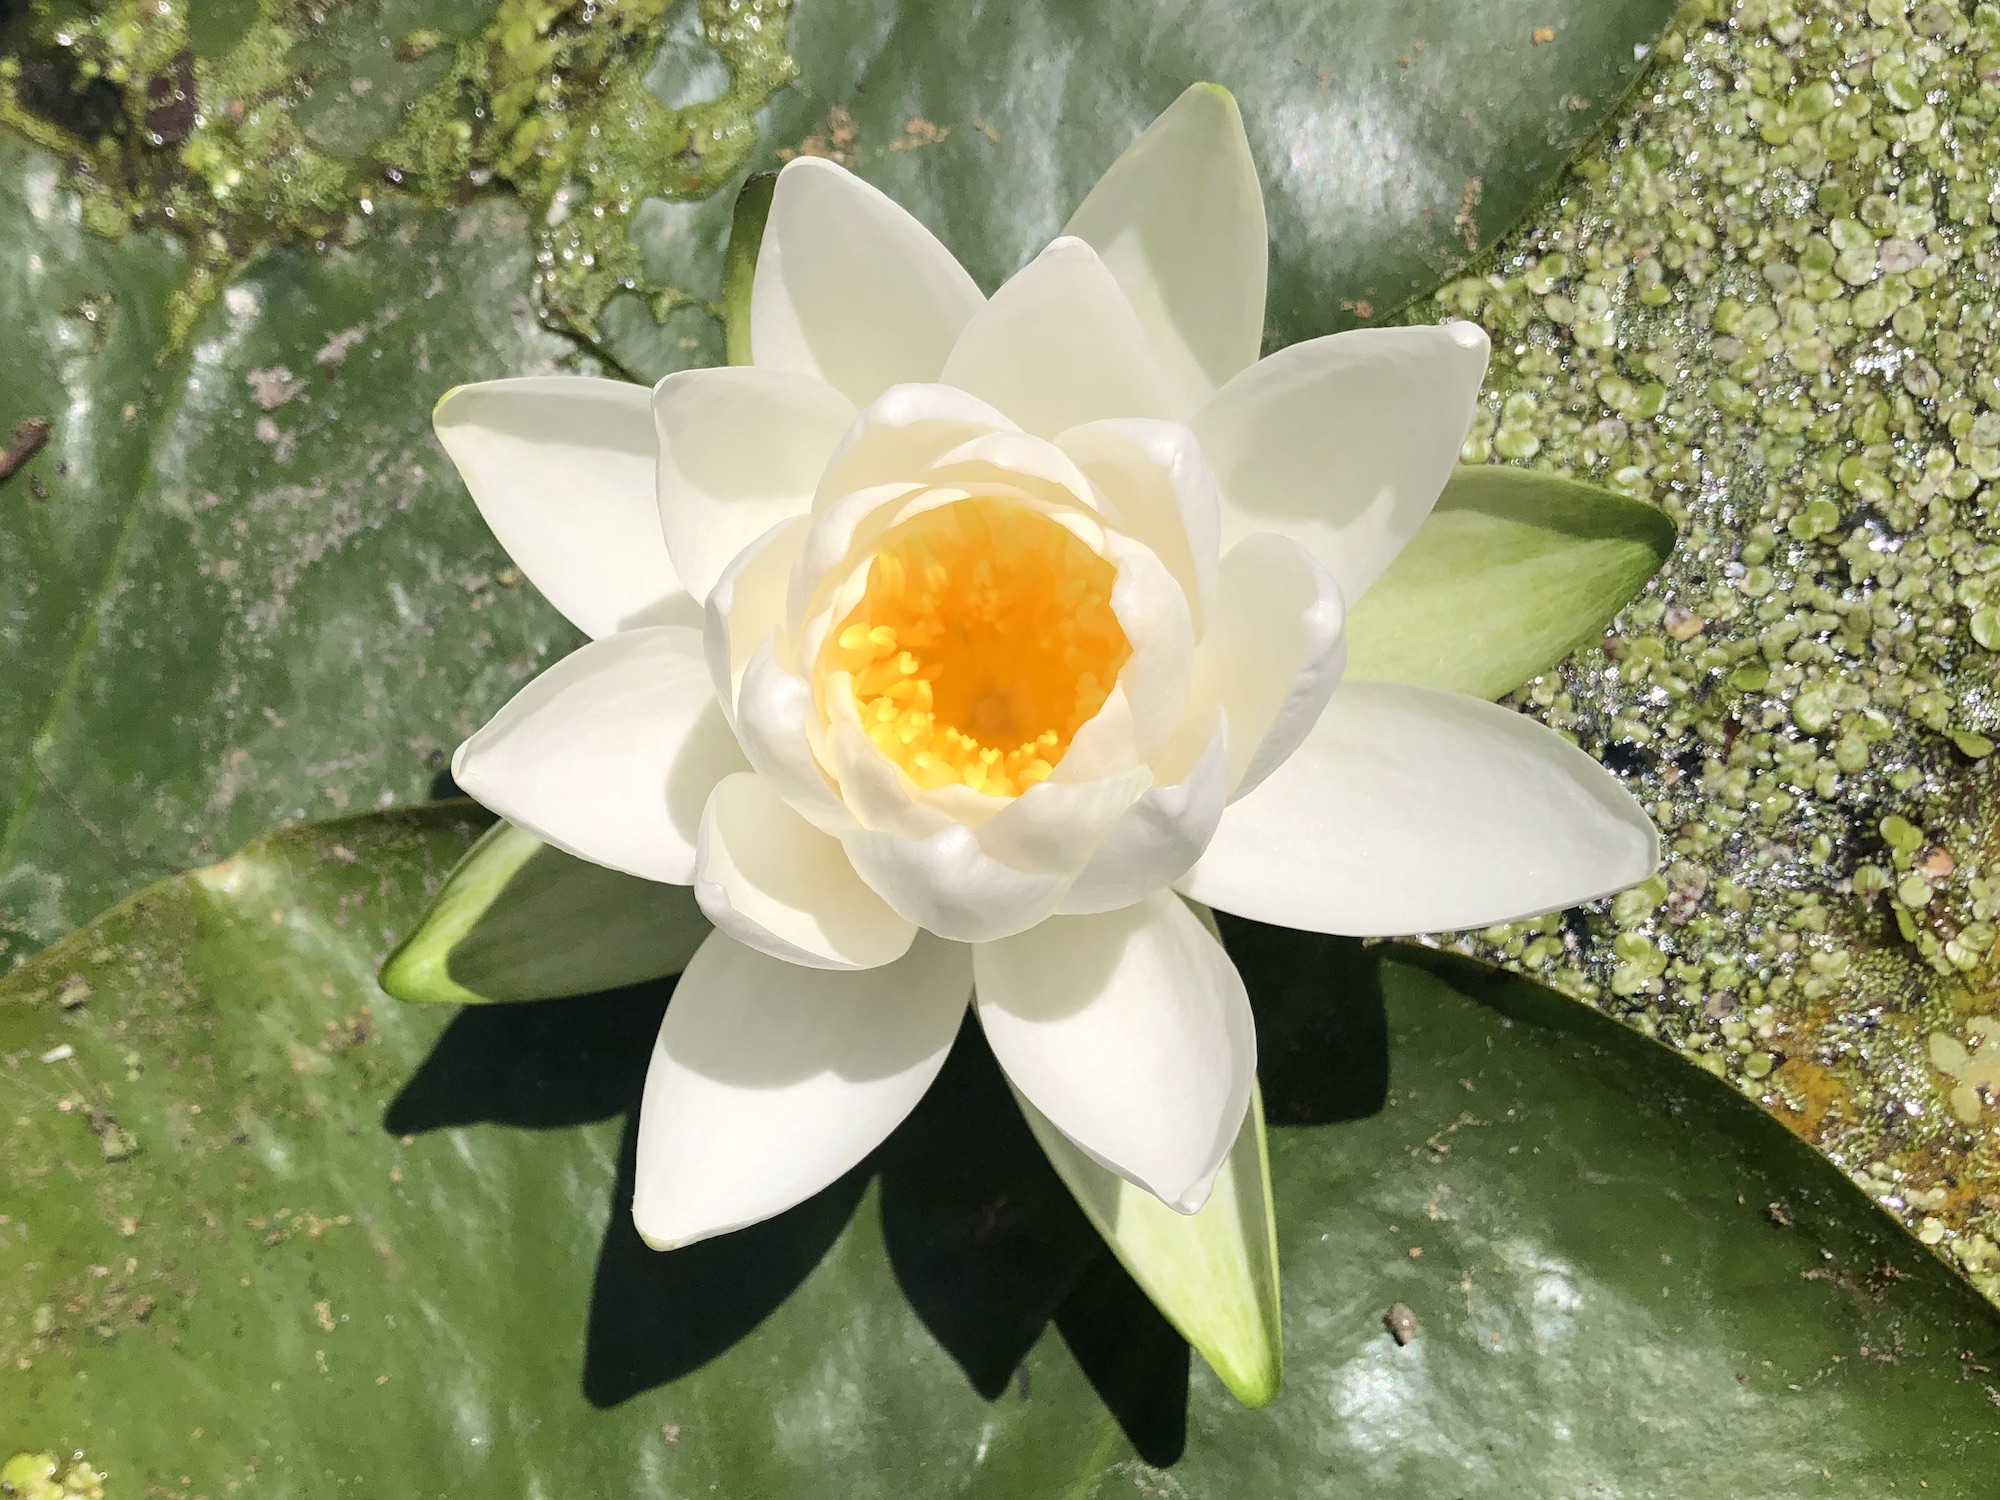 American White Water Lily in Lake Wingra by Wingra Boatsvin Madison, Wisconsin on June 19, 2022.